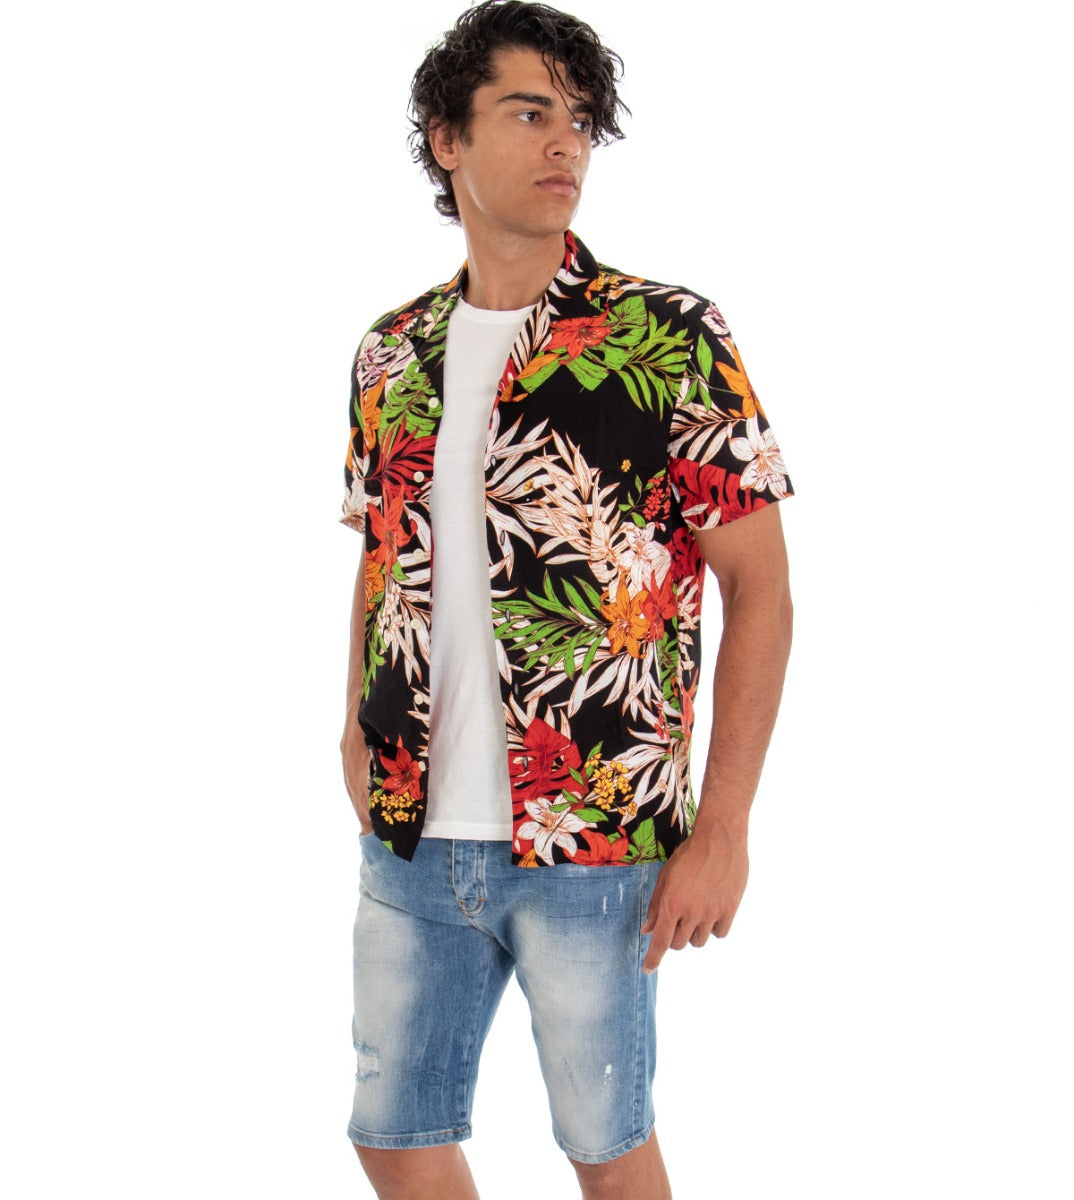 Men's Short Sleeve Shirt with Collar Multicolored Floral Pattern Black GIOSAL-CC1108A